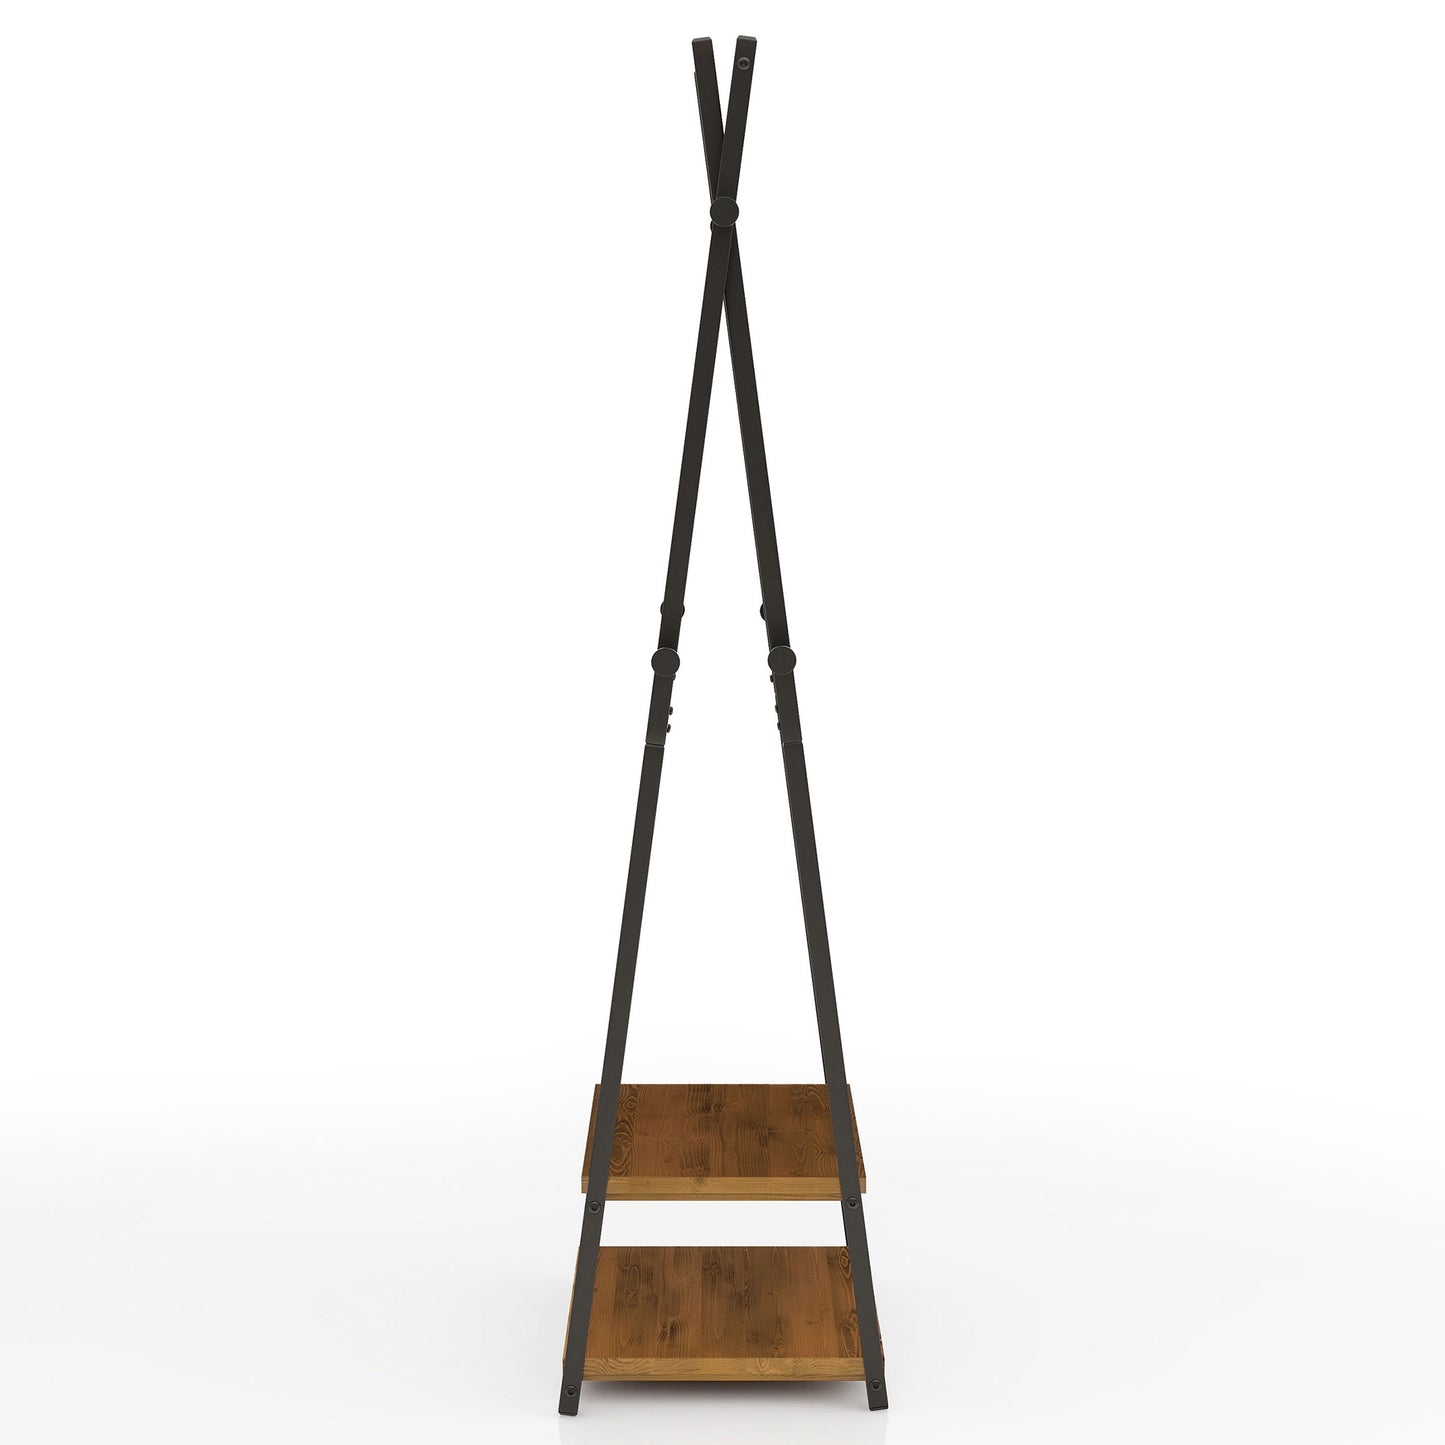 Front-facing side view of an industrial warm oak and black two-shelf six-hook coat rack on a white background